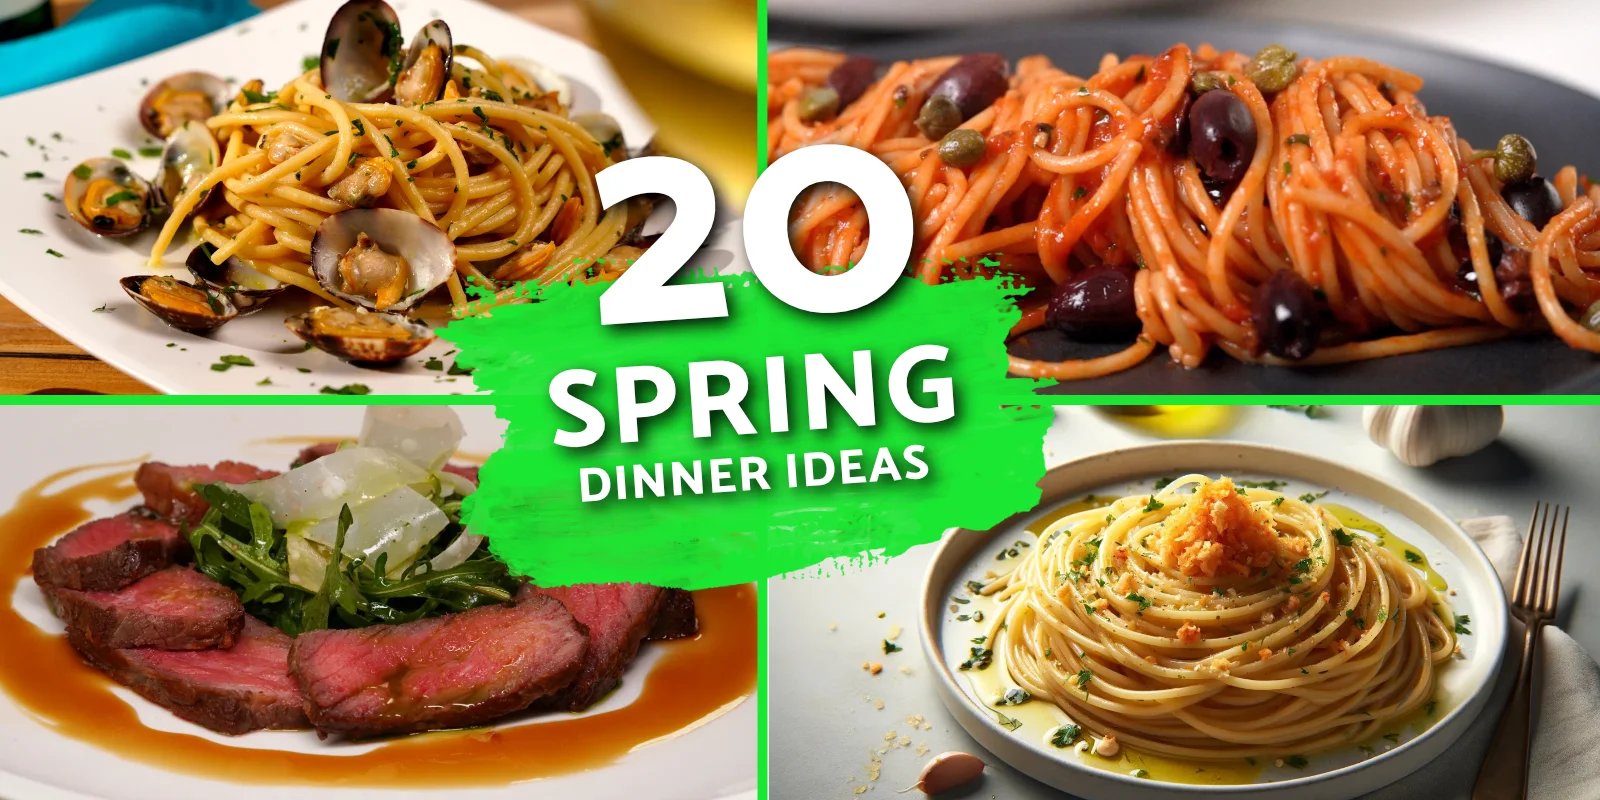 20 Spring Dinner Ideas from Italy: Fresh and Fast Recipes!